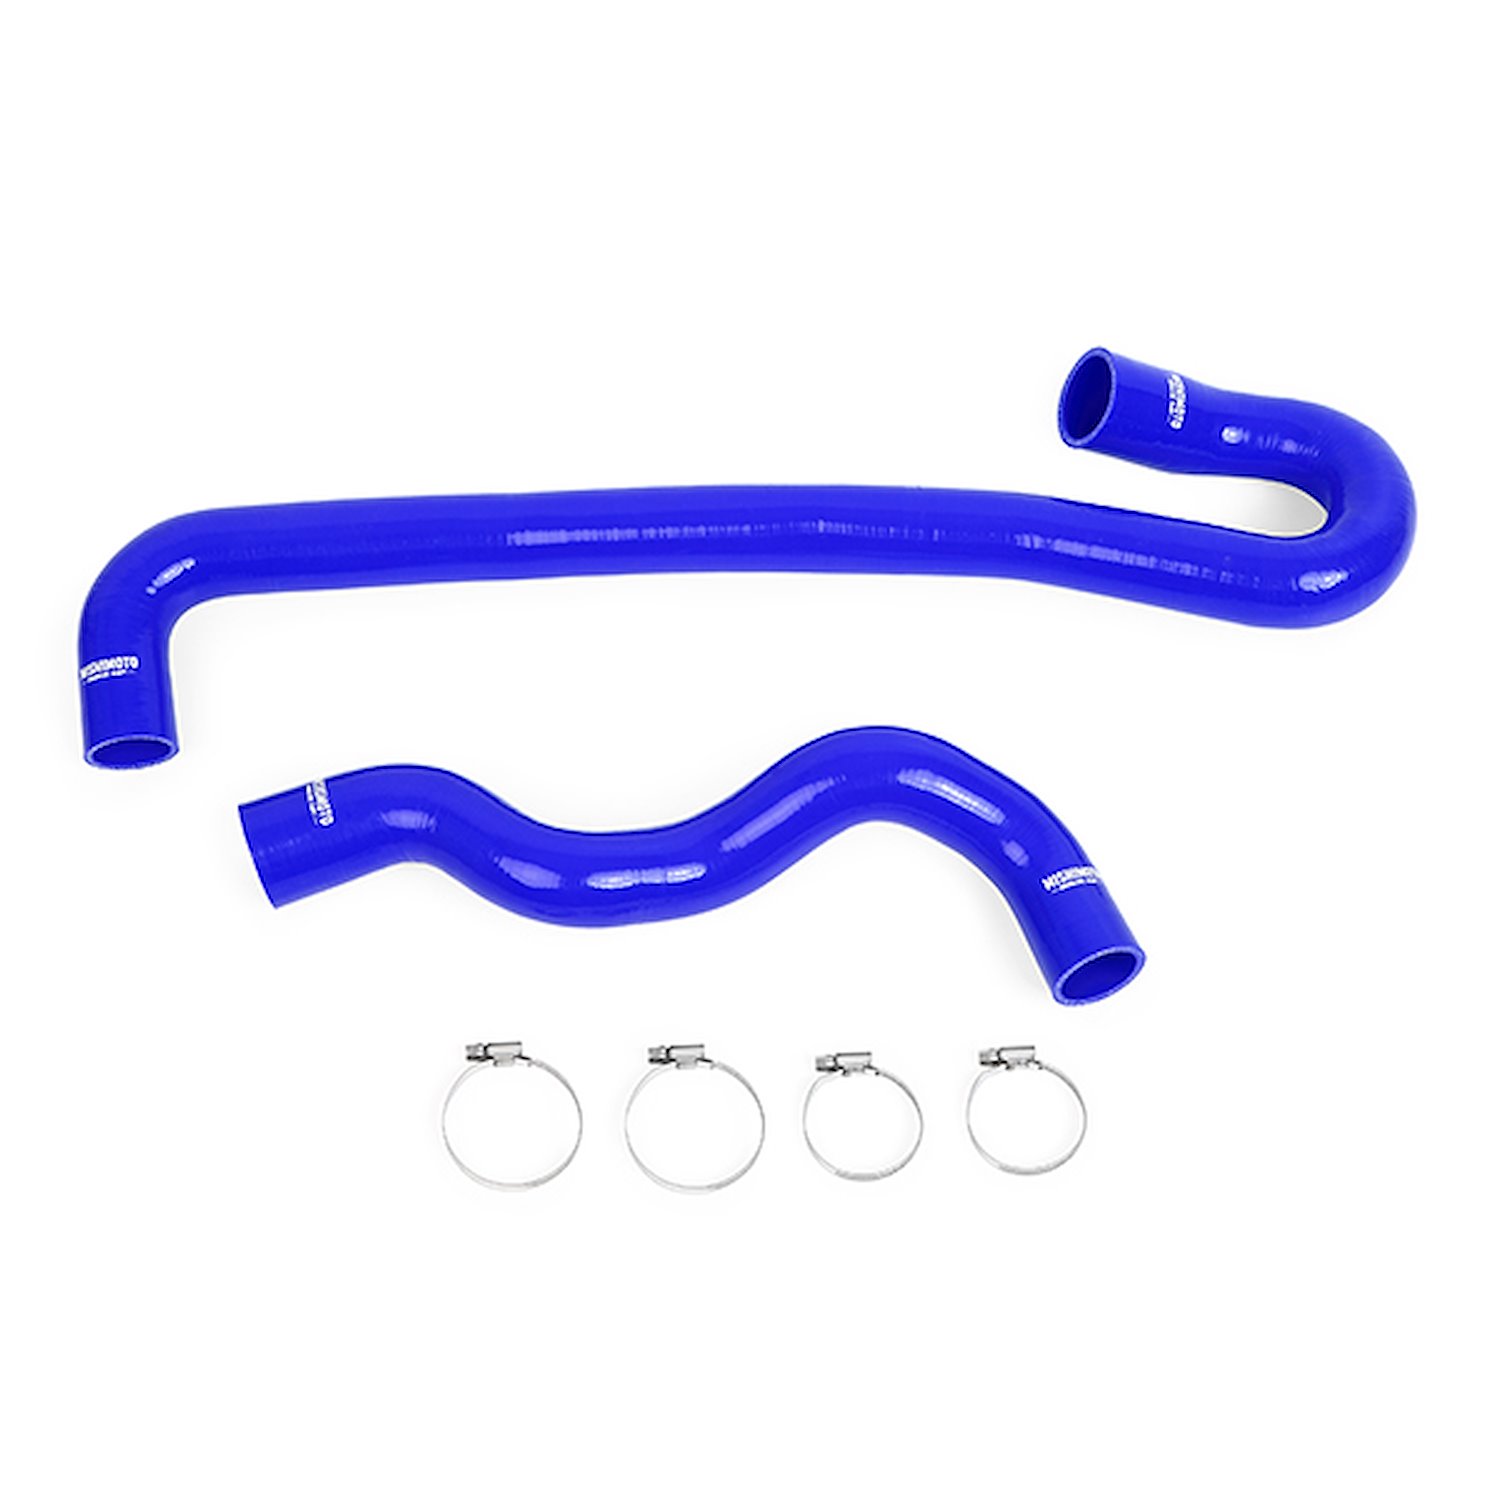 MMHOSE-WK2-11BL Silicone Radiator Hose Kit, fits Jeep Grand Cherokee 5.7L V8 2011+